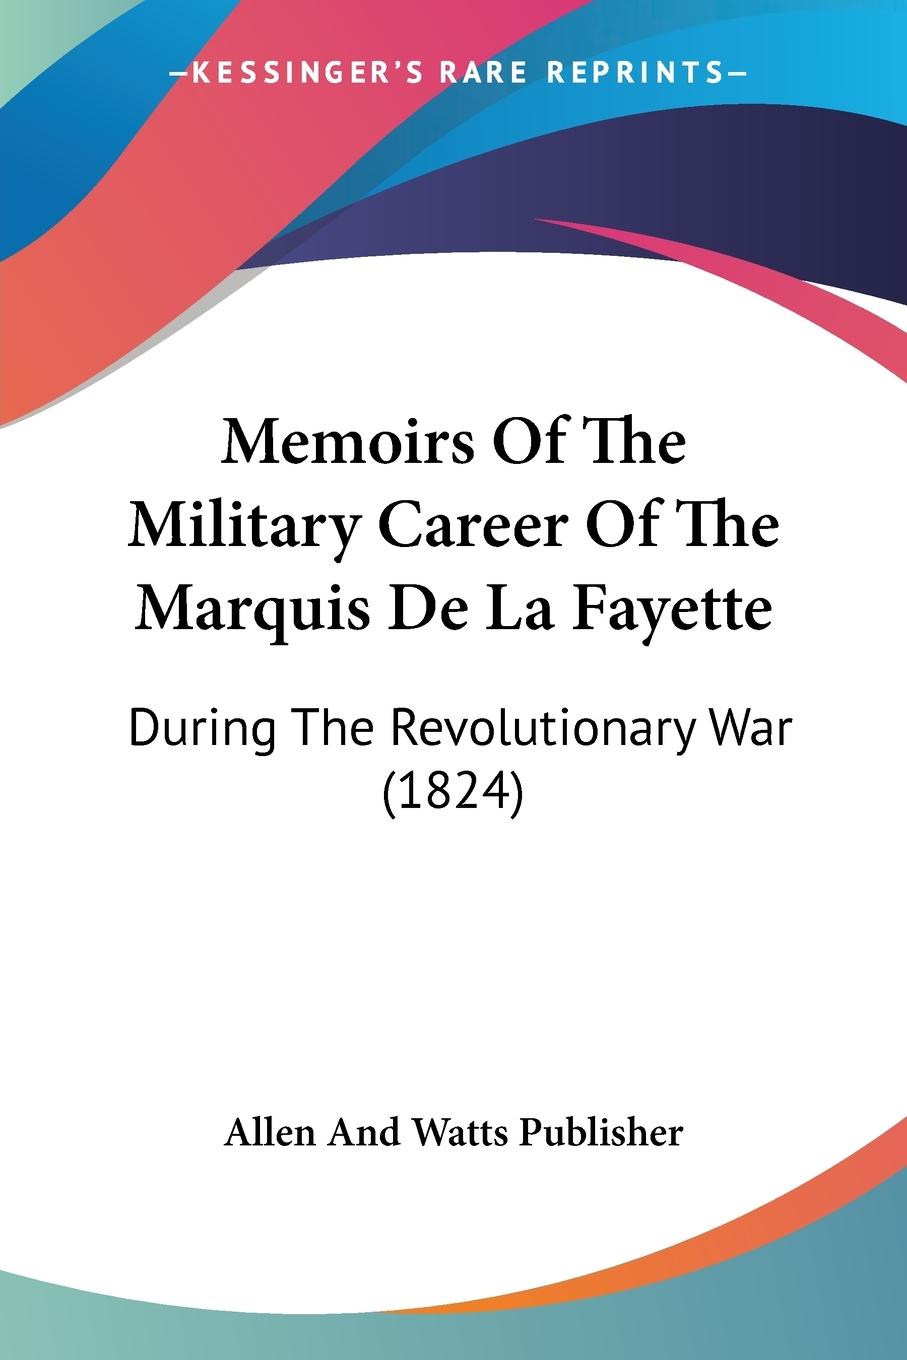 Memoirs Of The Military Career Of The Marquis De La Fayette - Allen And Watts Publisher